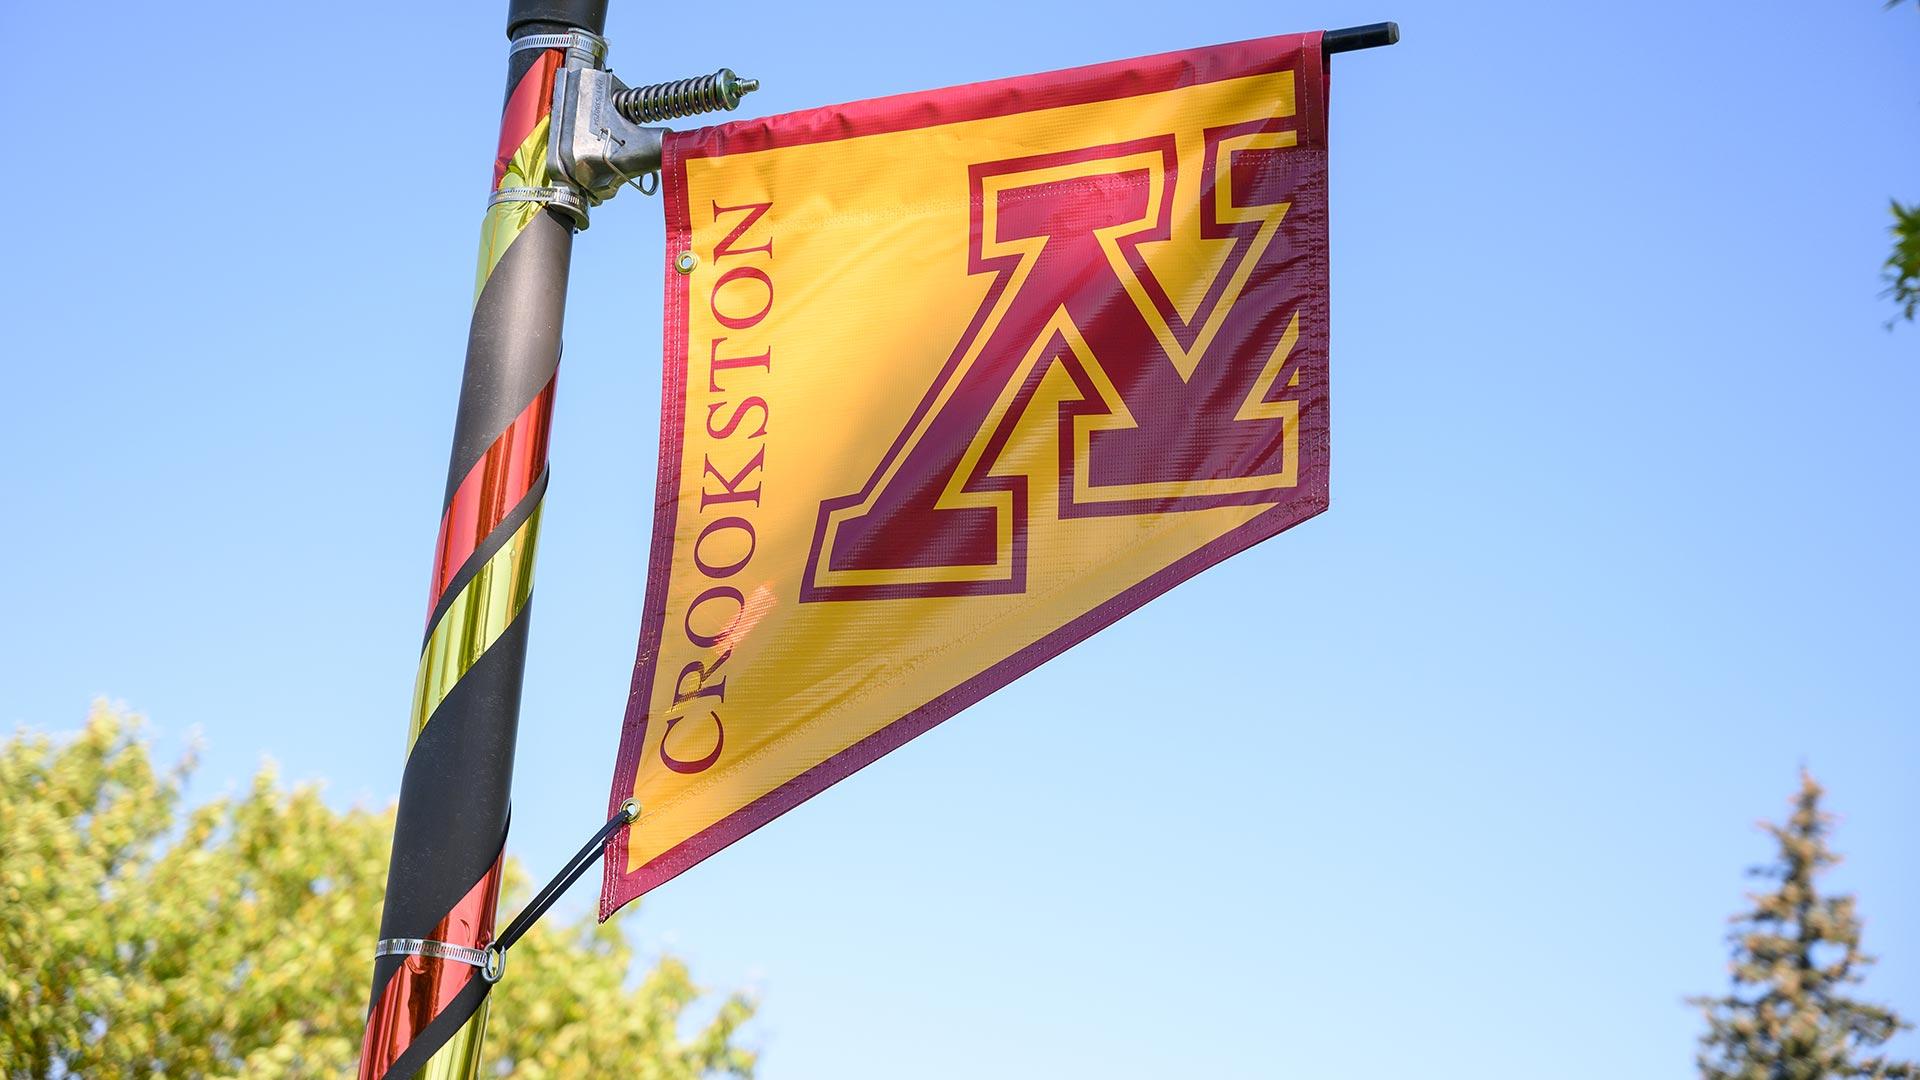 M Crookston logo flags on the Campus Mall